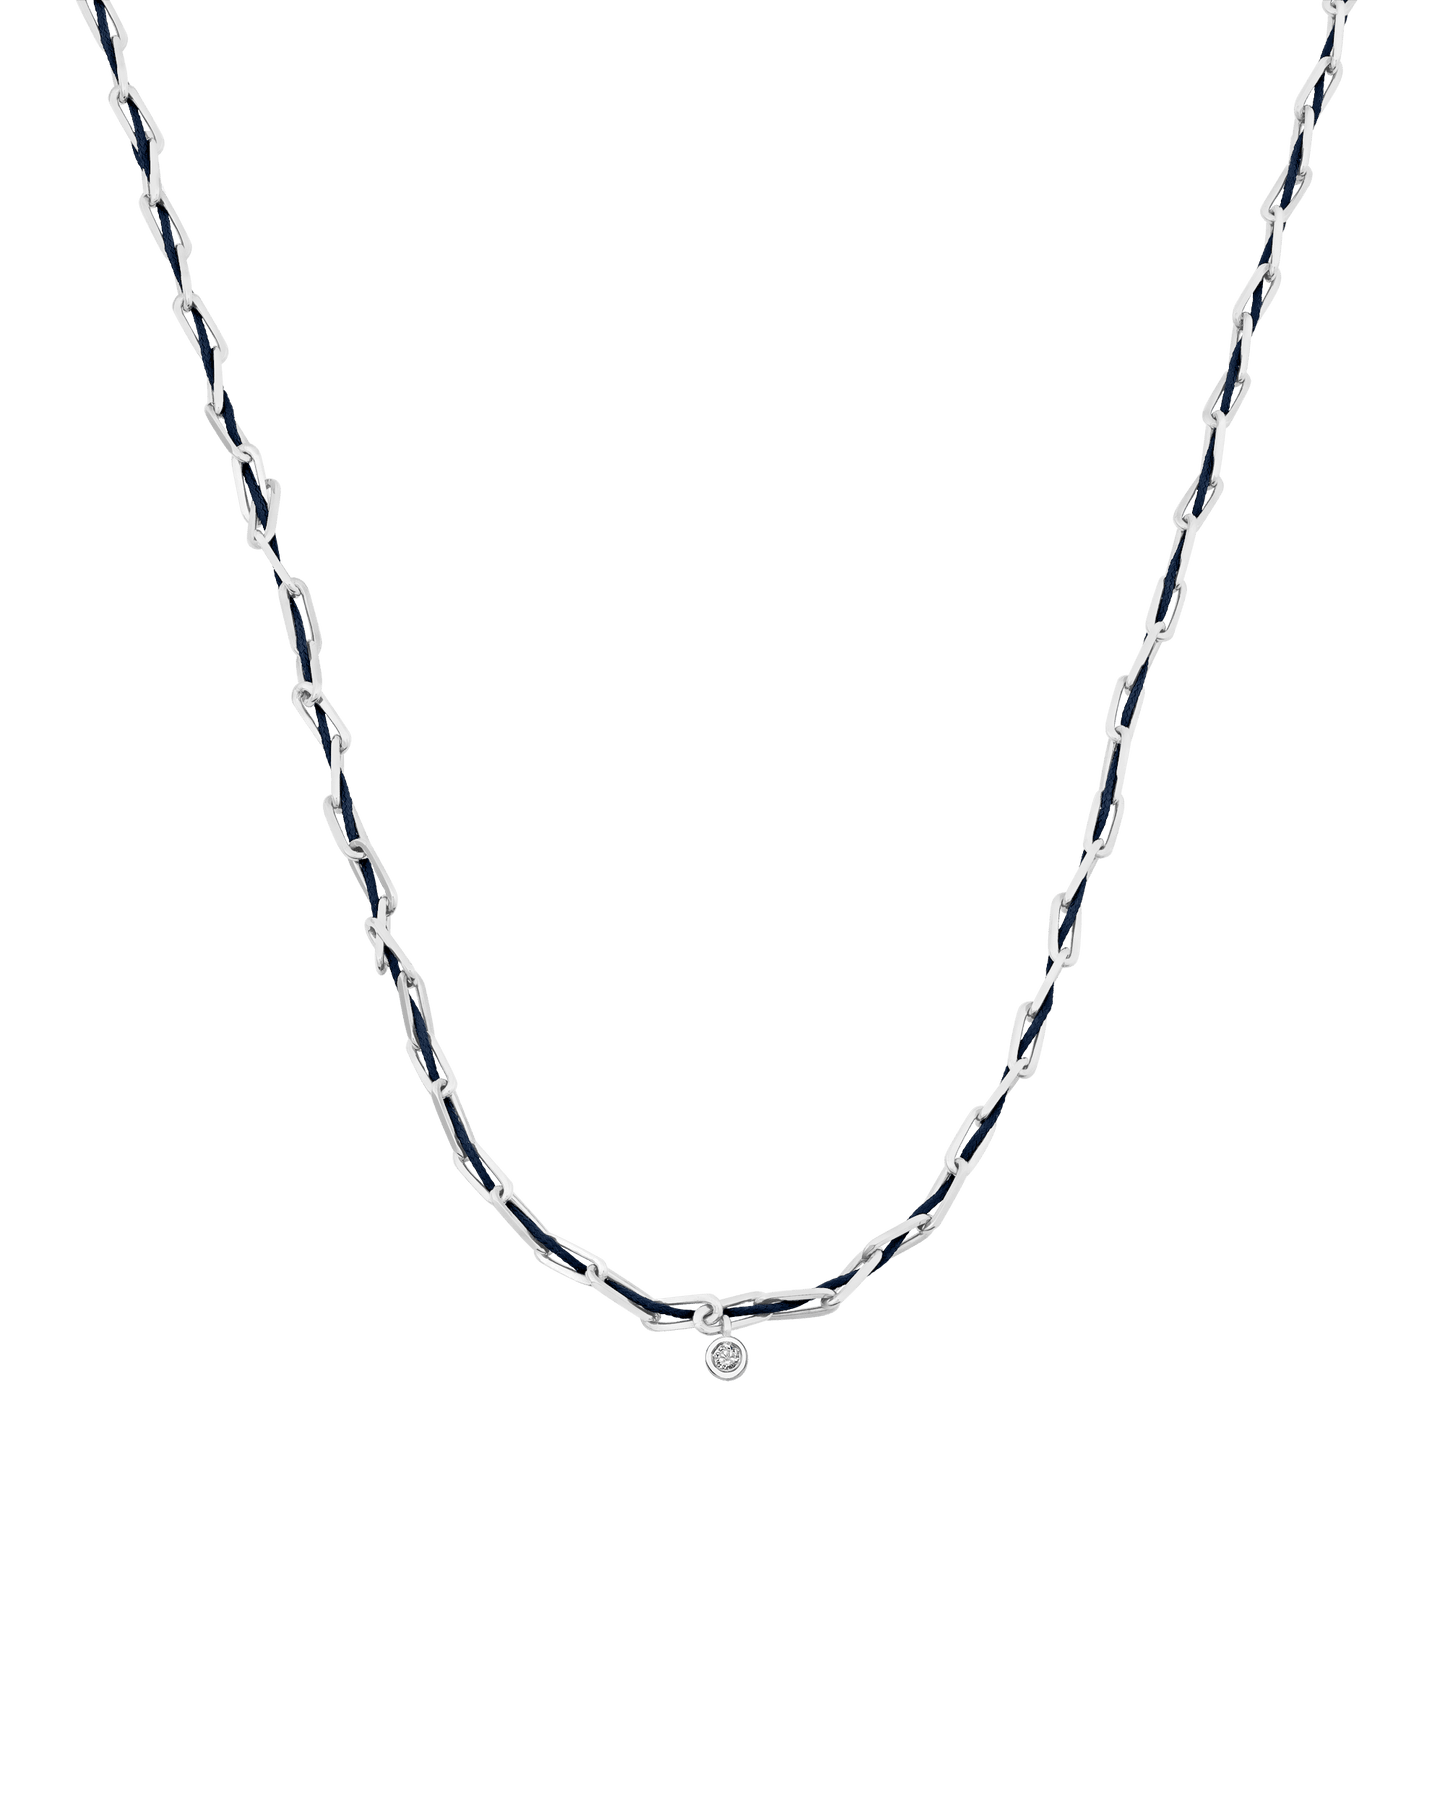 Twine Diamond Necklace - 925 Sterling Silver Necklaces magal-dev Navy Blue Medium: 0.05ct 16"